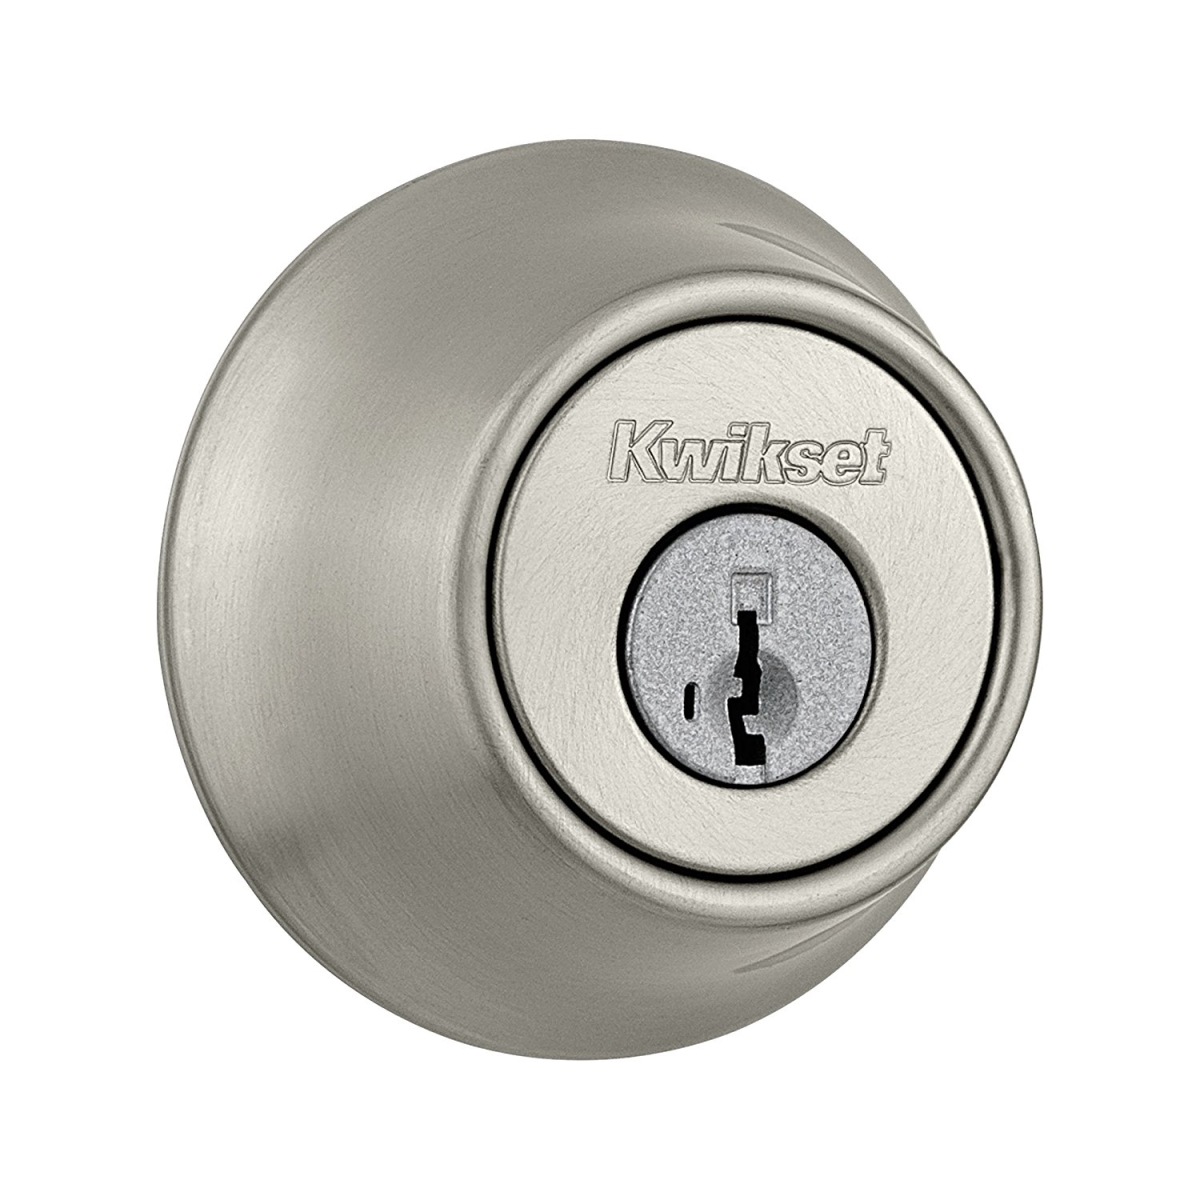 UPC 883351234382 product image for Kwikset 660-3SF Single Cylinder Dead Bolts - Featuring Smart Key | upcitemdb.com